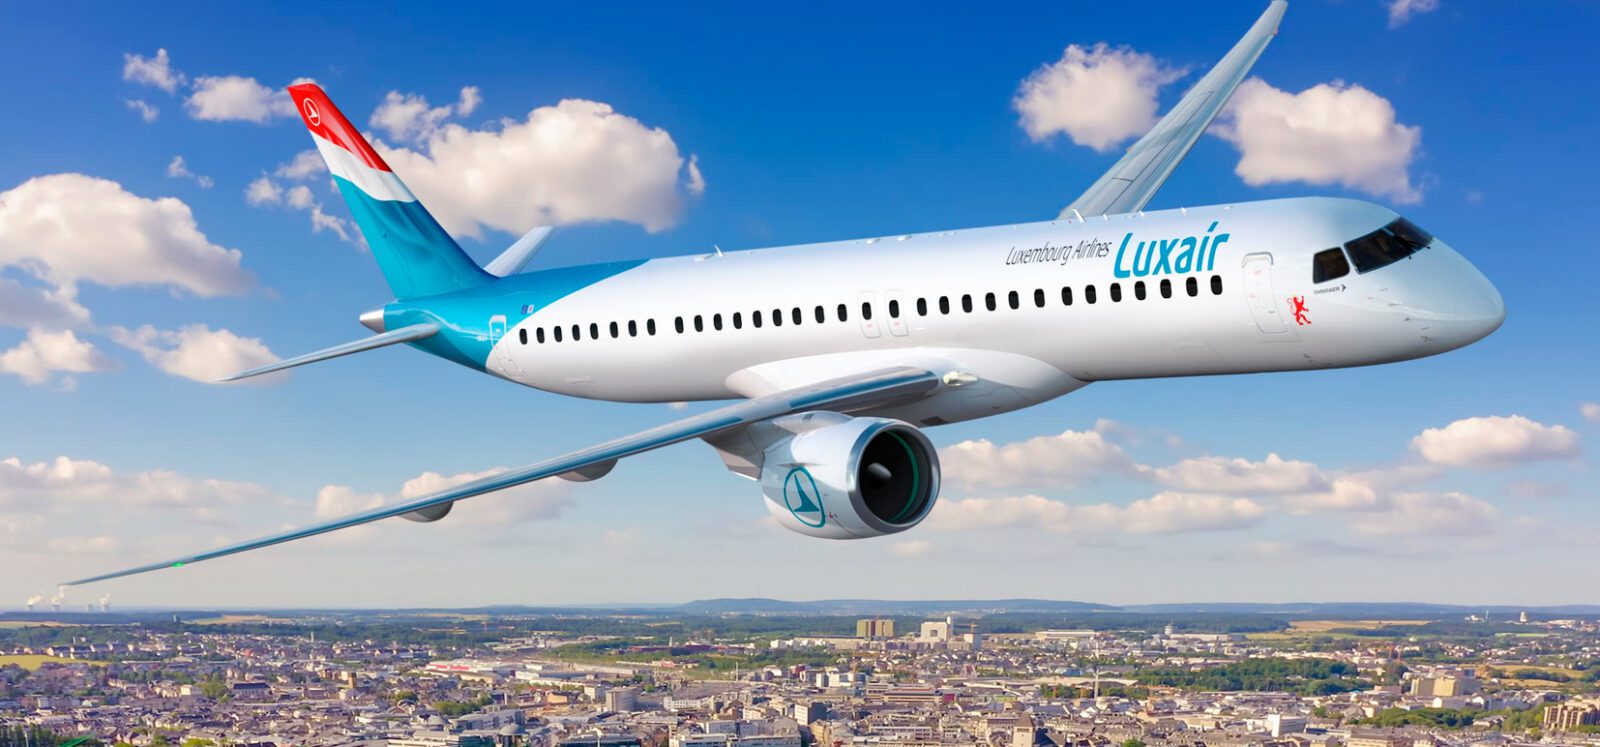 Luxair orders four Embraer E195-E2 jets, with options for five more aircraft